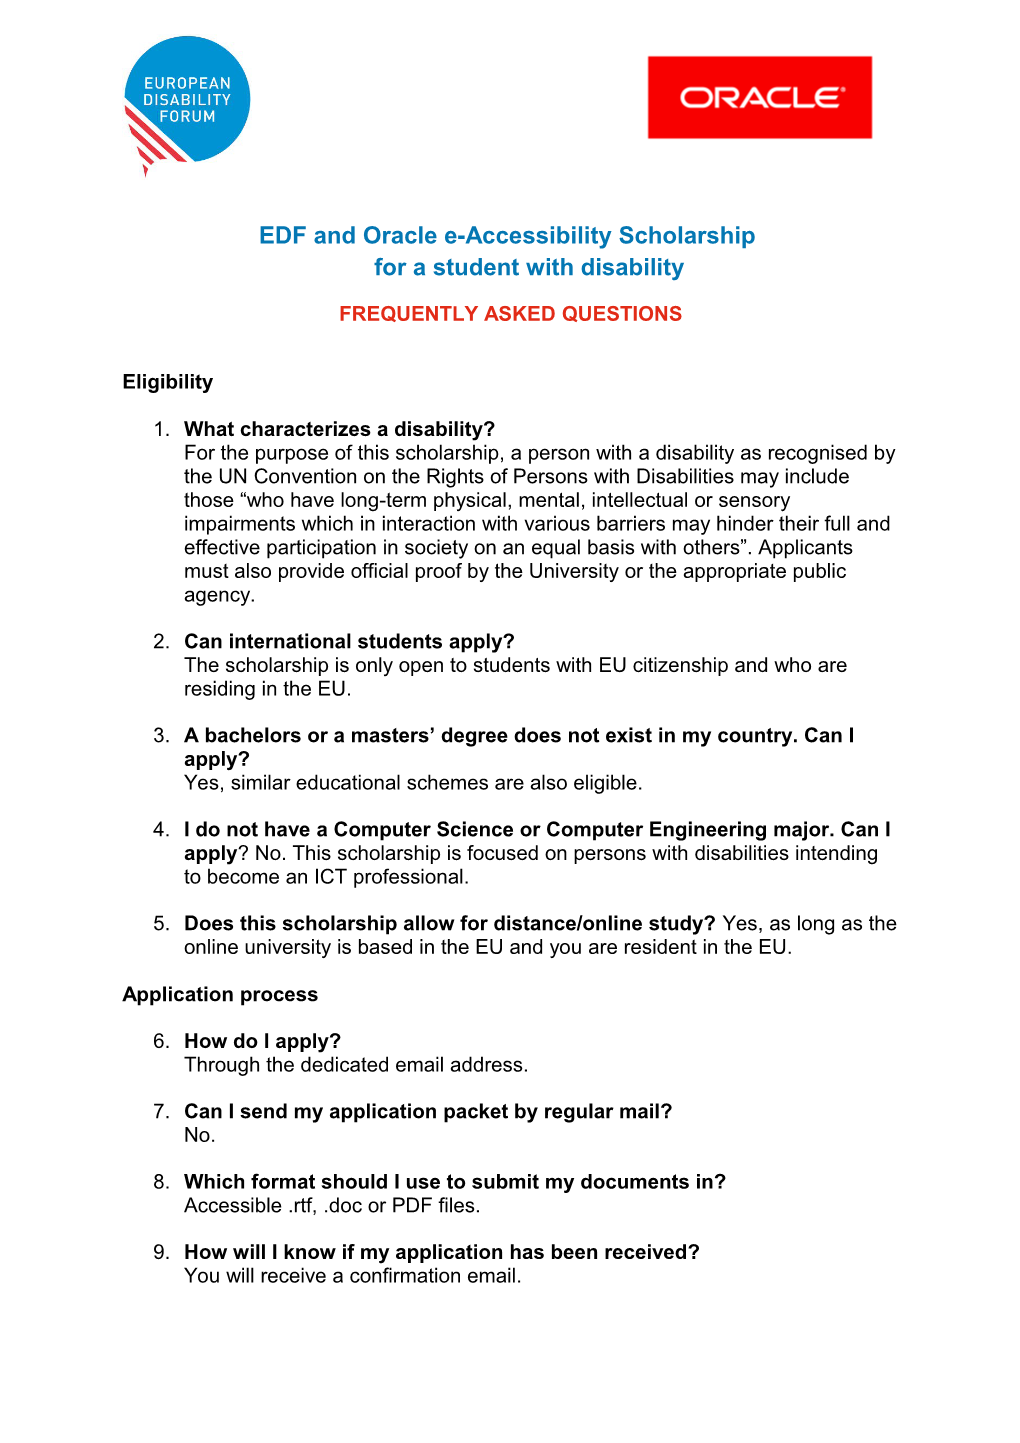 EDF and Oracle E-Accessibility Scholarship for a Student with Disability